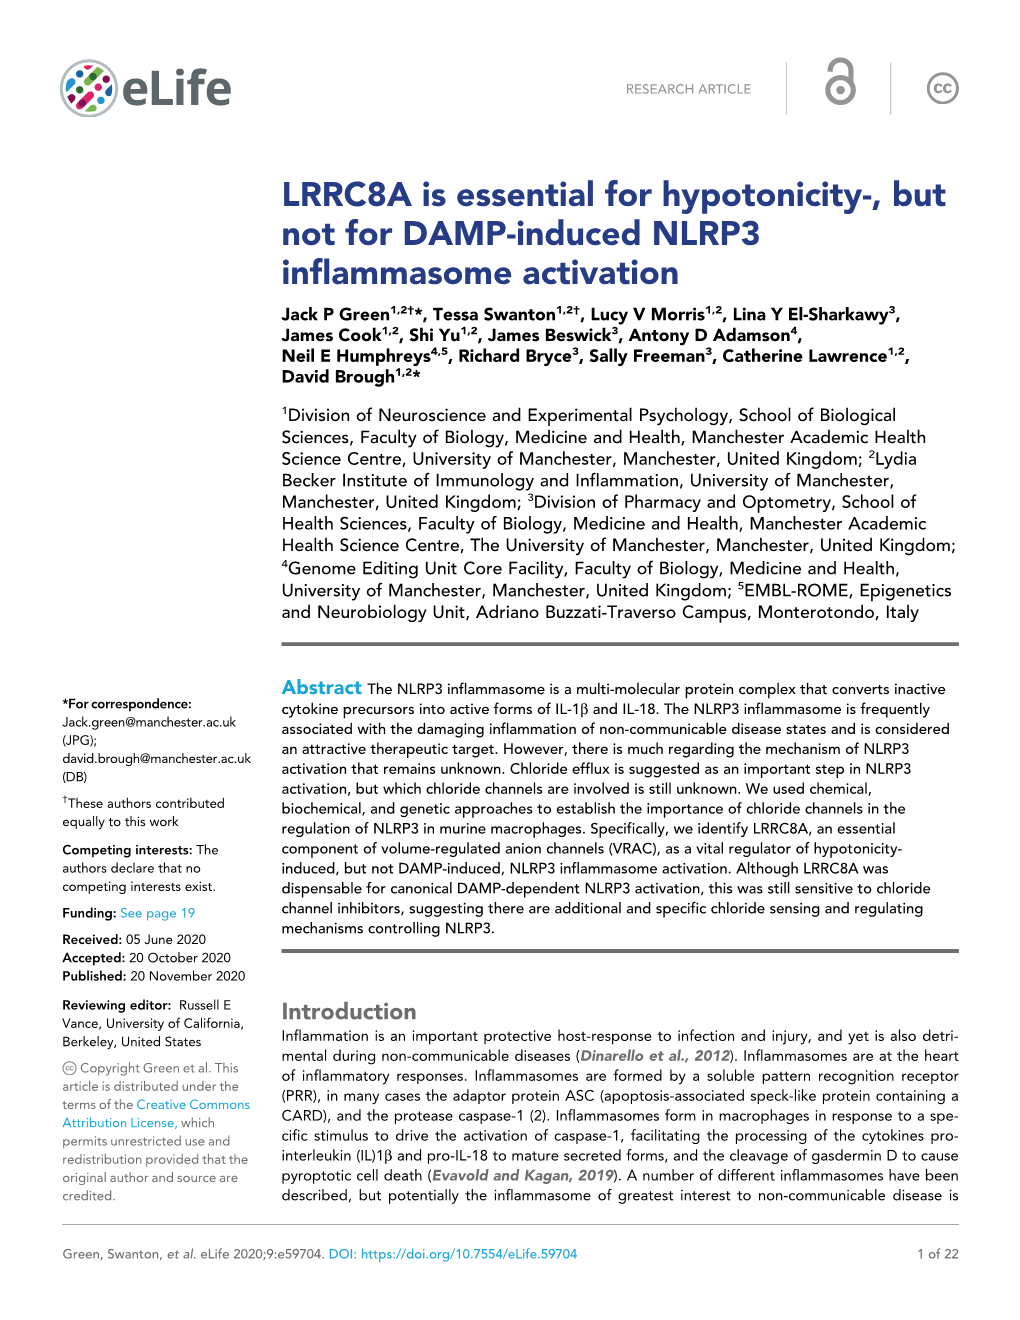 LRRC8A Is Essential for Hypotonicity-, but Not for DAMP-Induced NLRP3